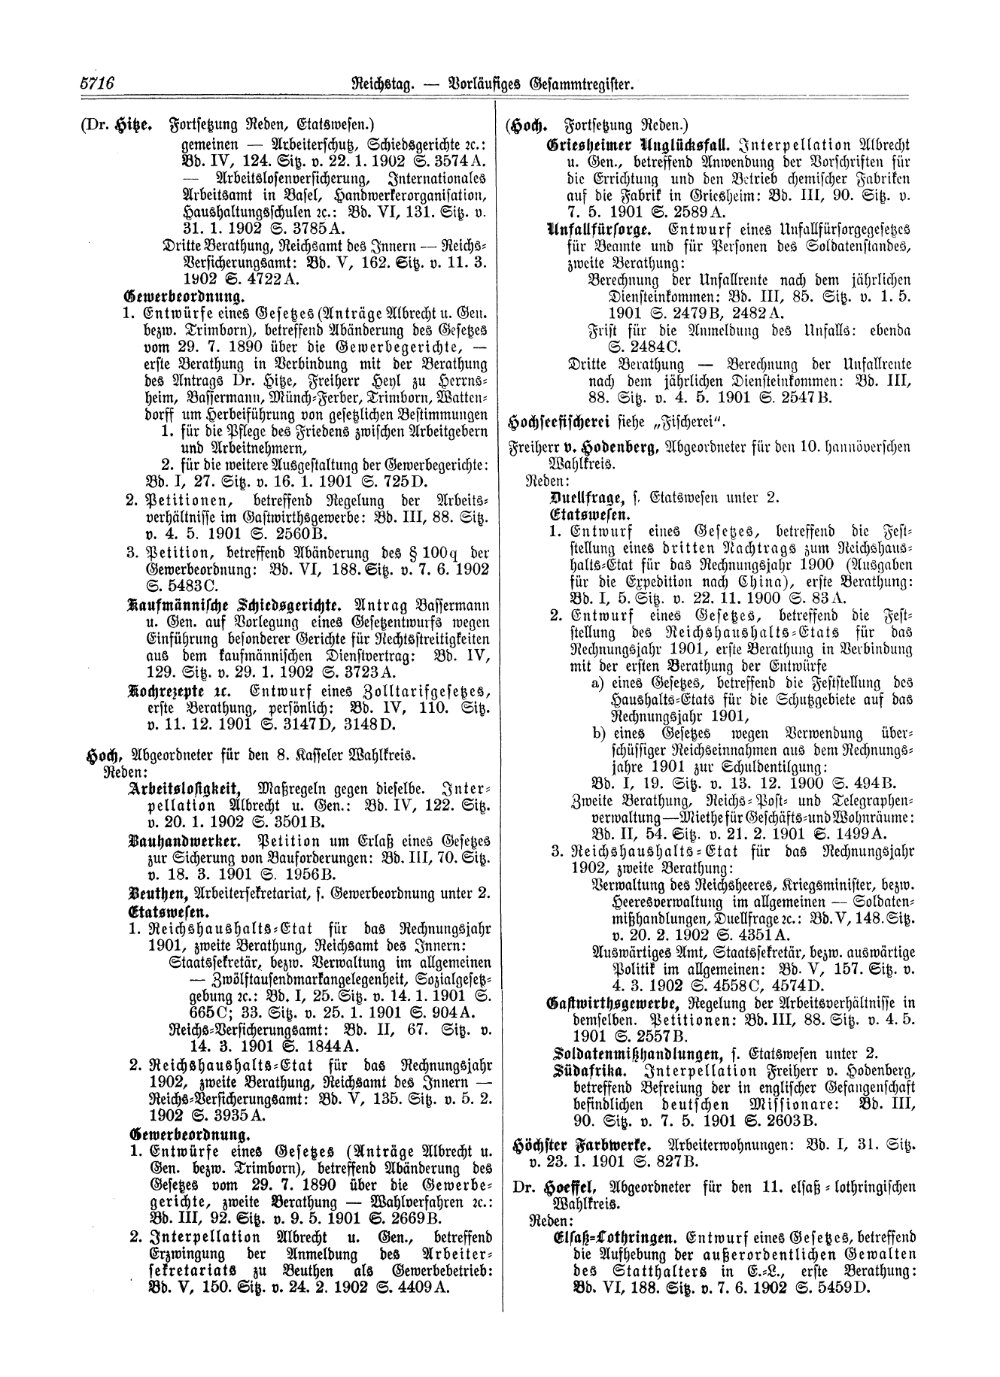 Scan of page 5716